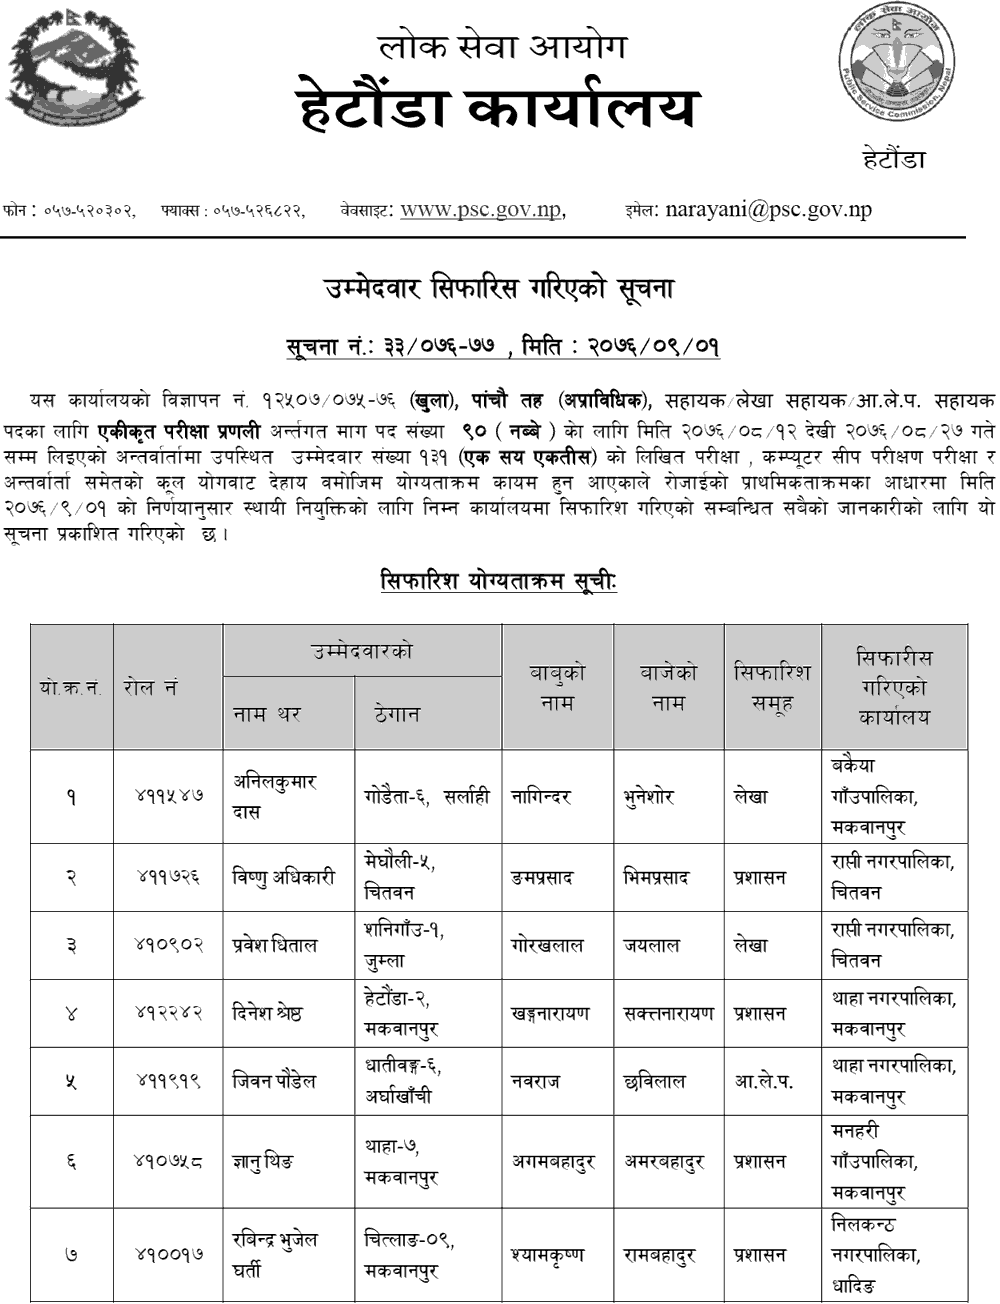 Lok Sewa Aayog Hetauda Local Level Assistant 5th Final Result and Appointment